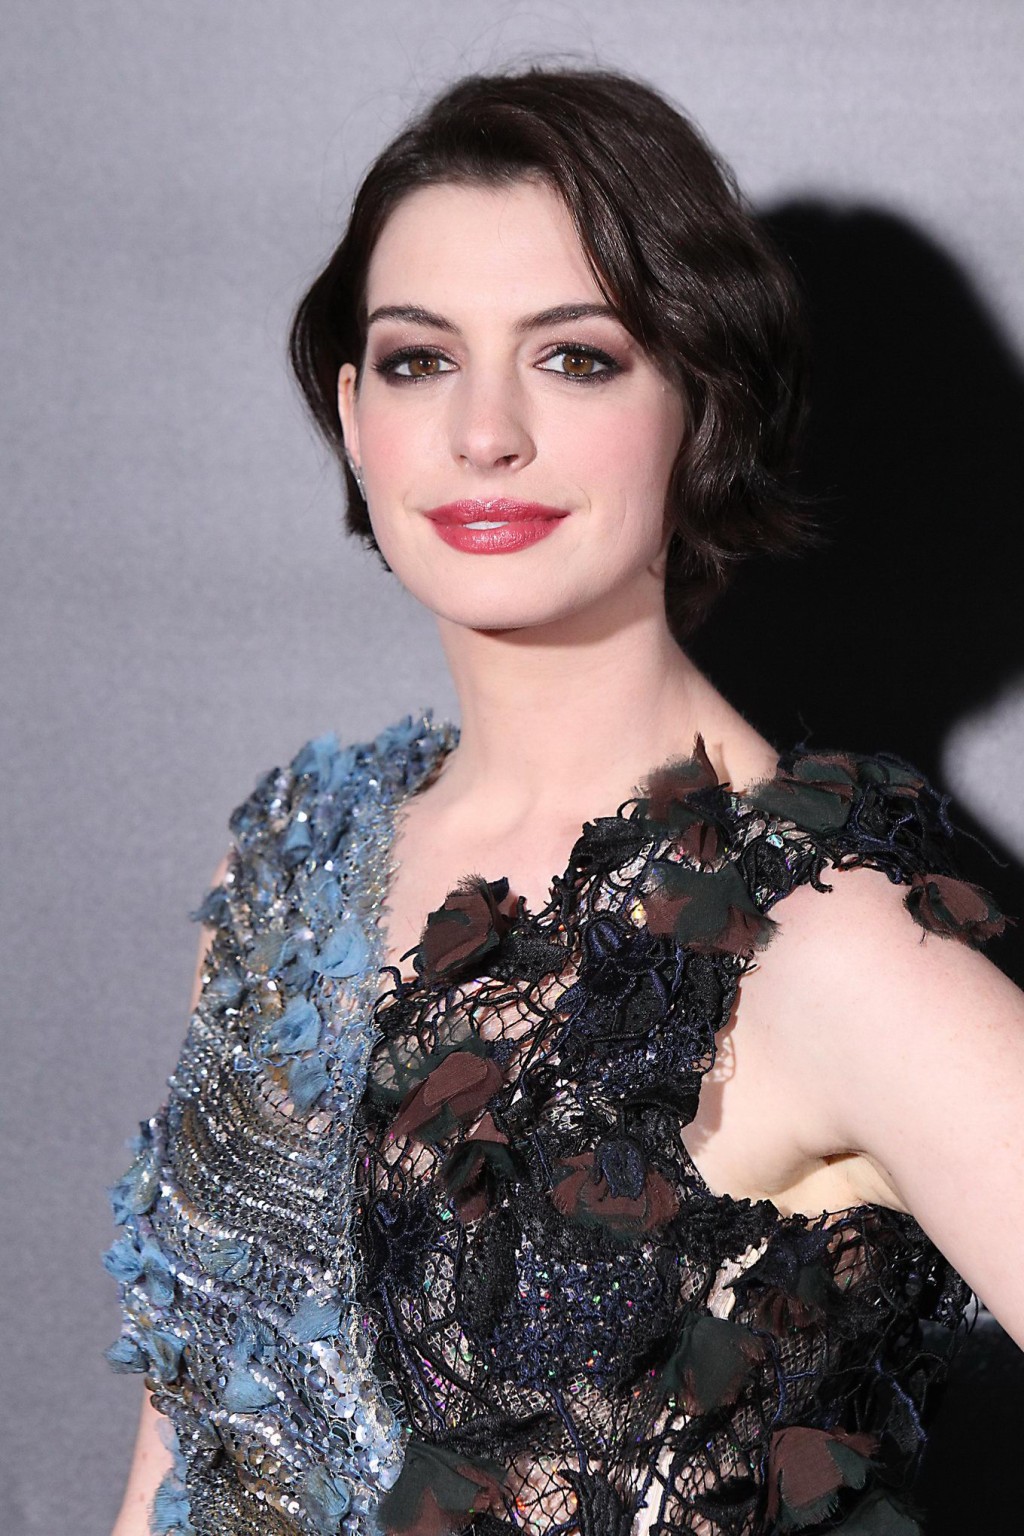 Anne Hathaway wearing seethru lace mini dress at the Interstellar premiere in NY #75182131